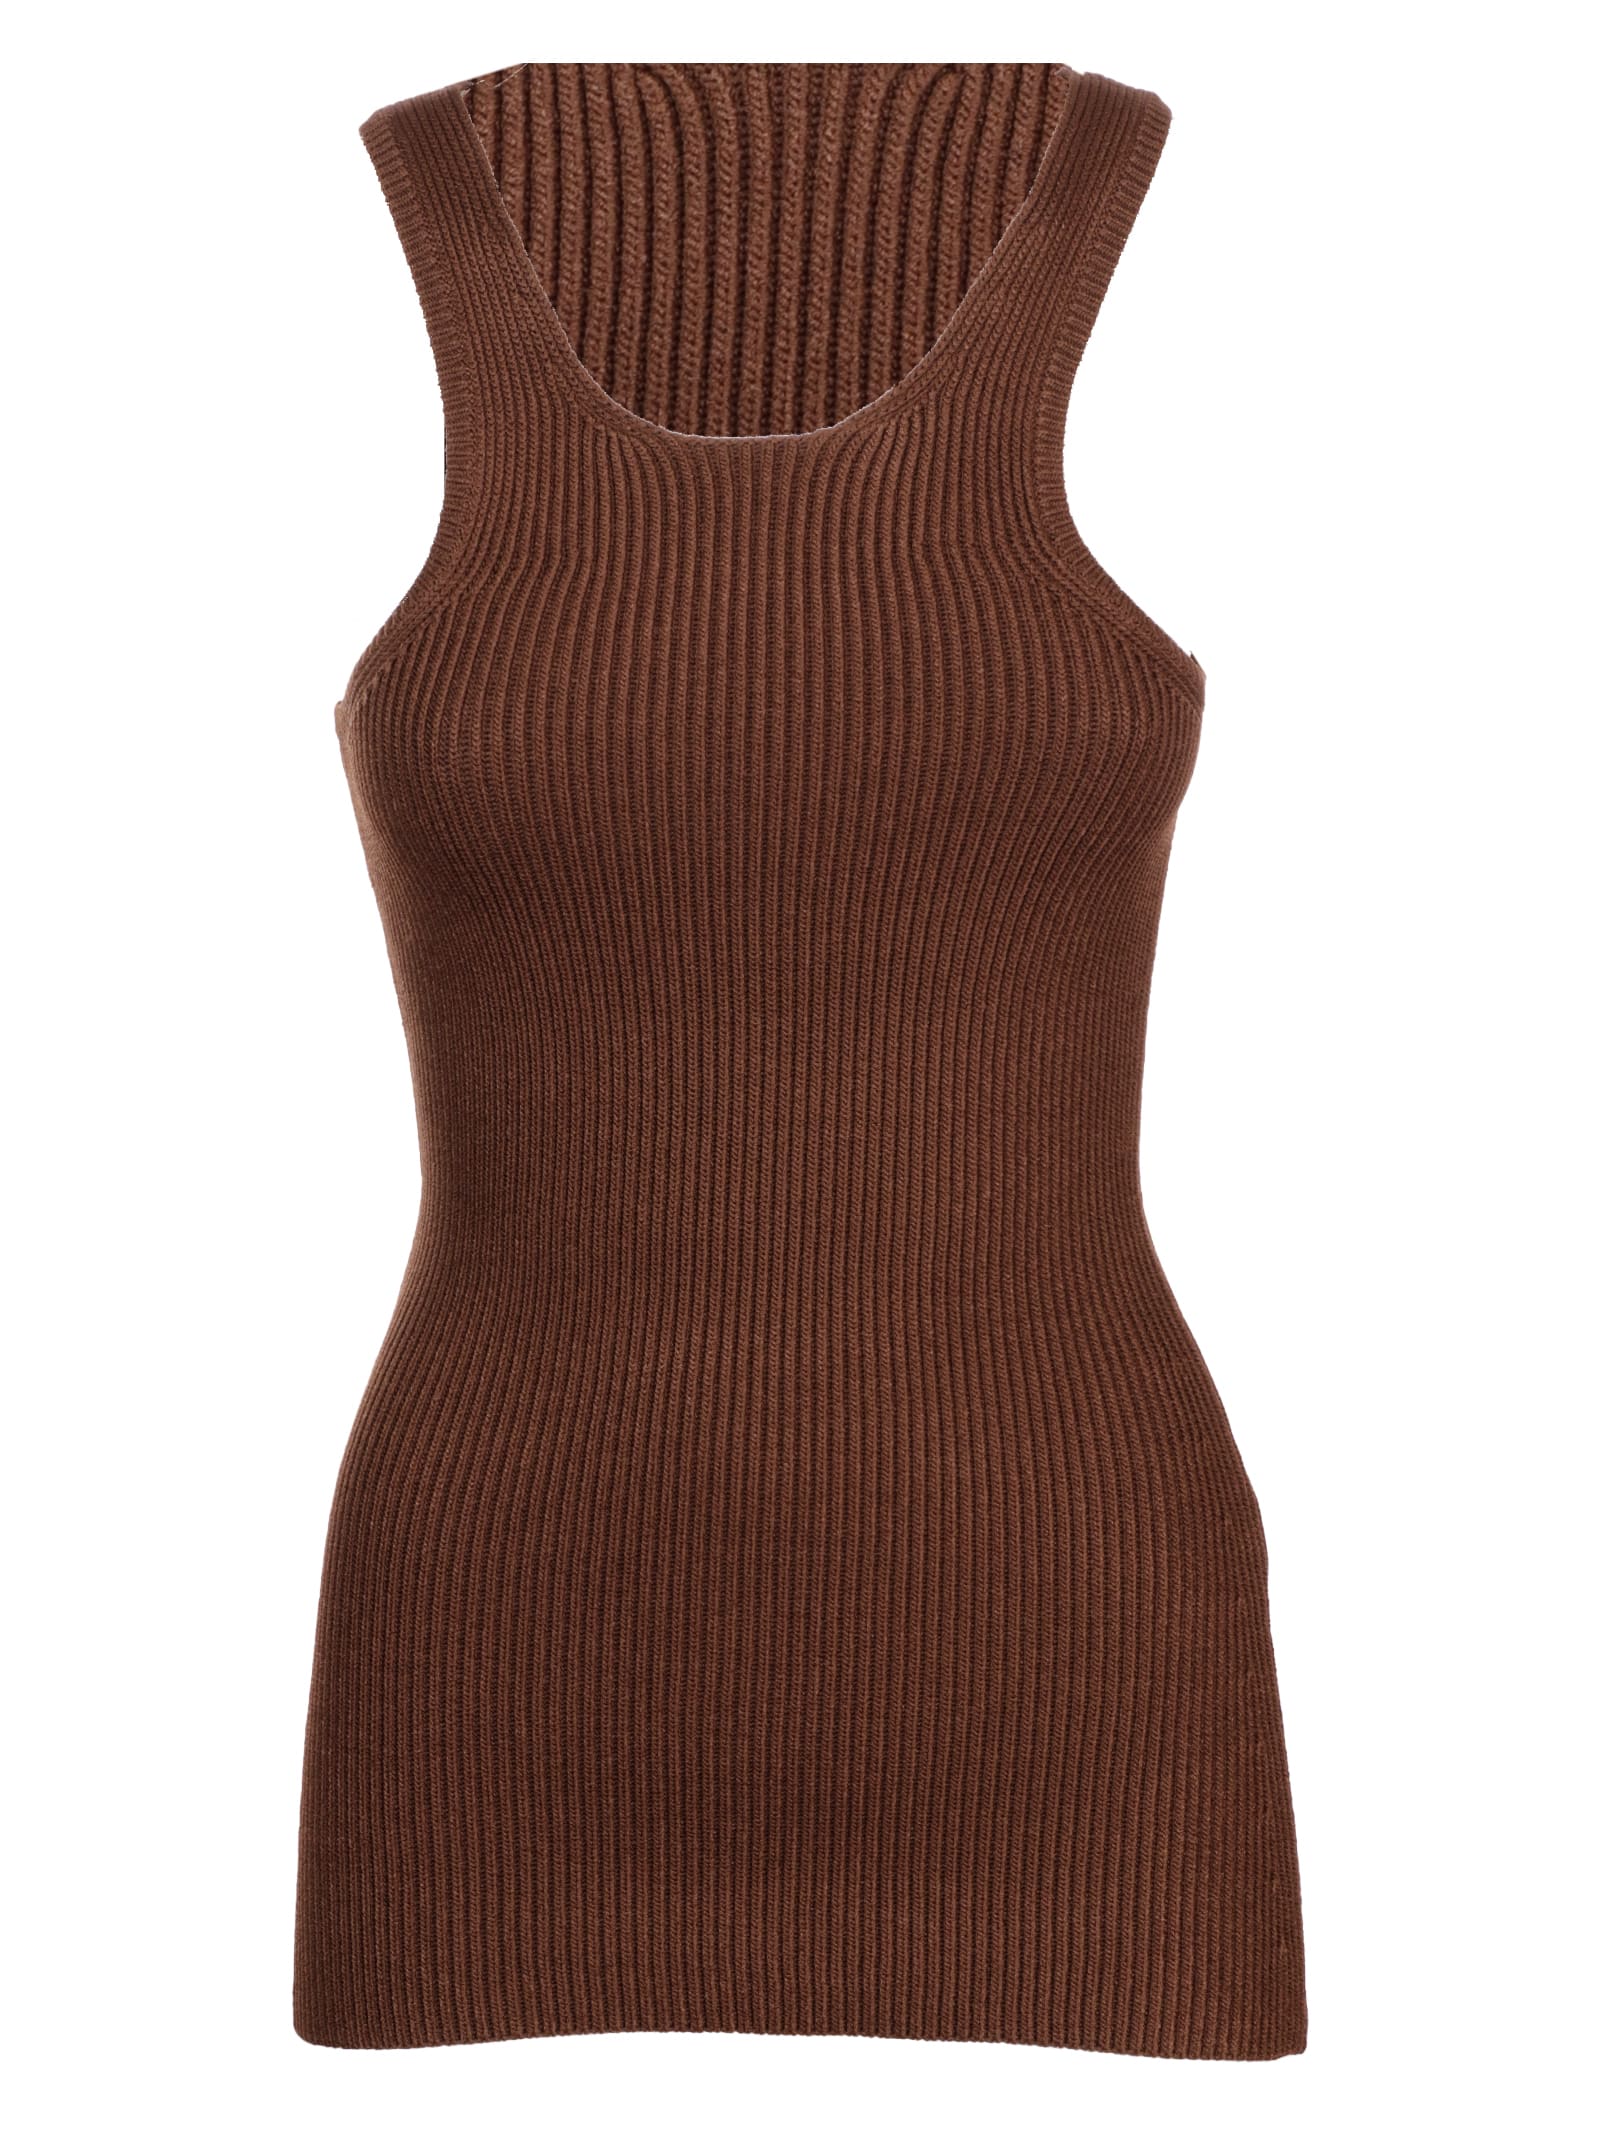 Totême Curved Compact Knit Tank